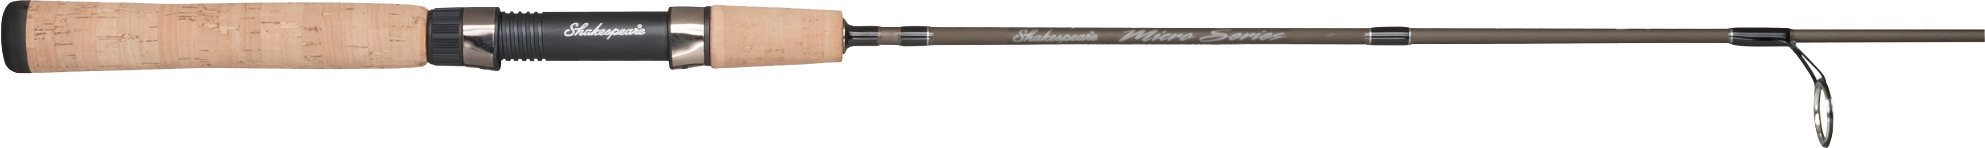 Shakespeare Micro Spinning Rod, 2 Piece, Light, 1/16-3/8oz Lures, 4 lb,  10lb, 7 Guides